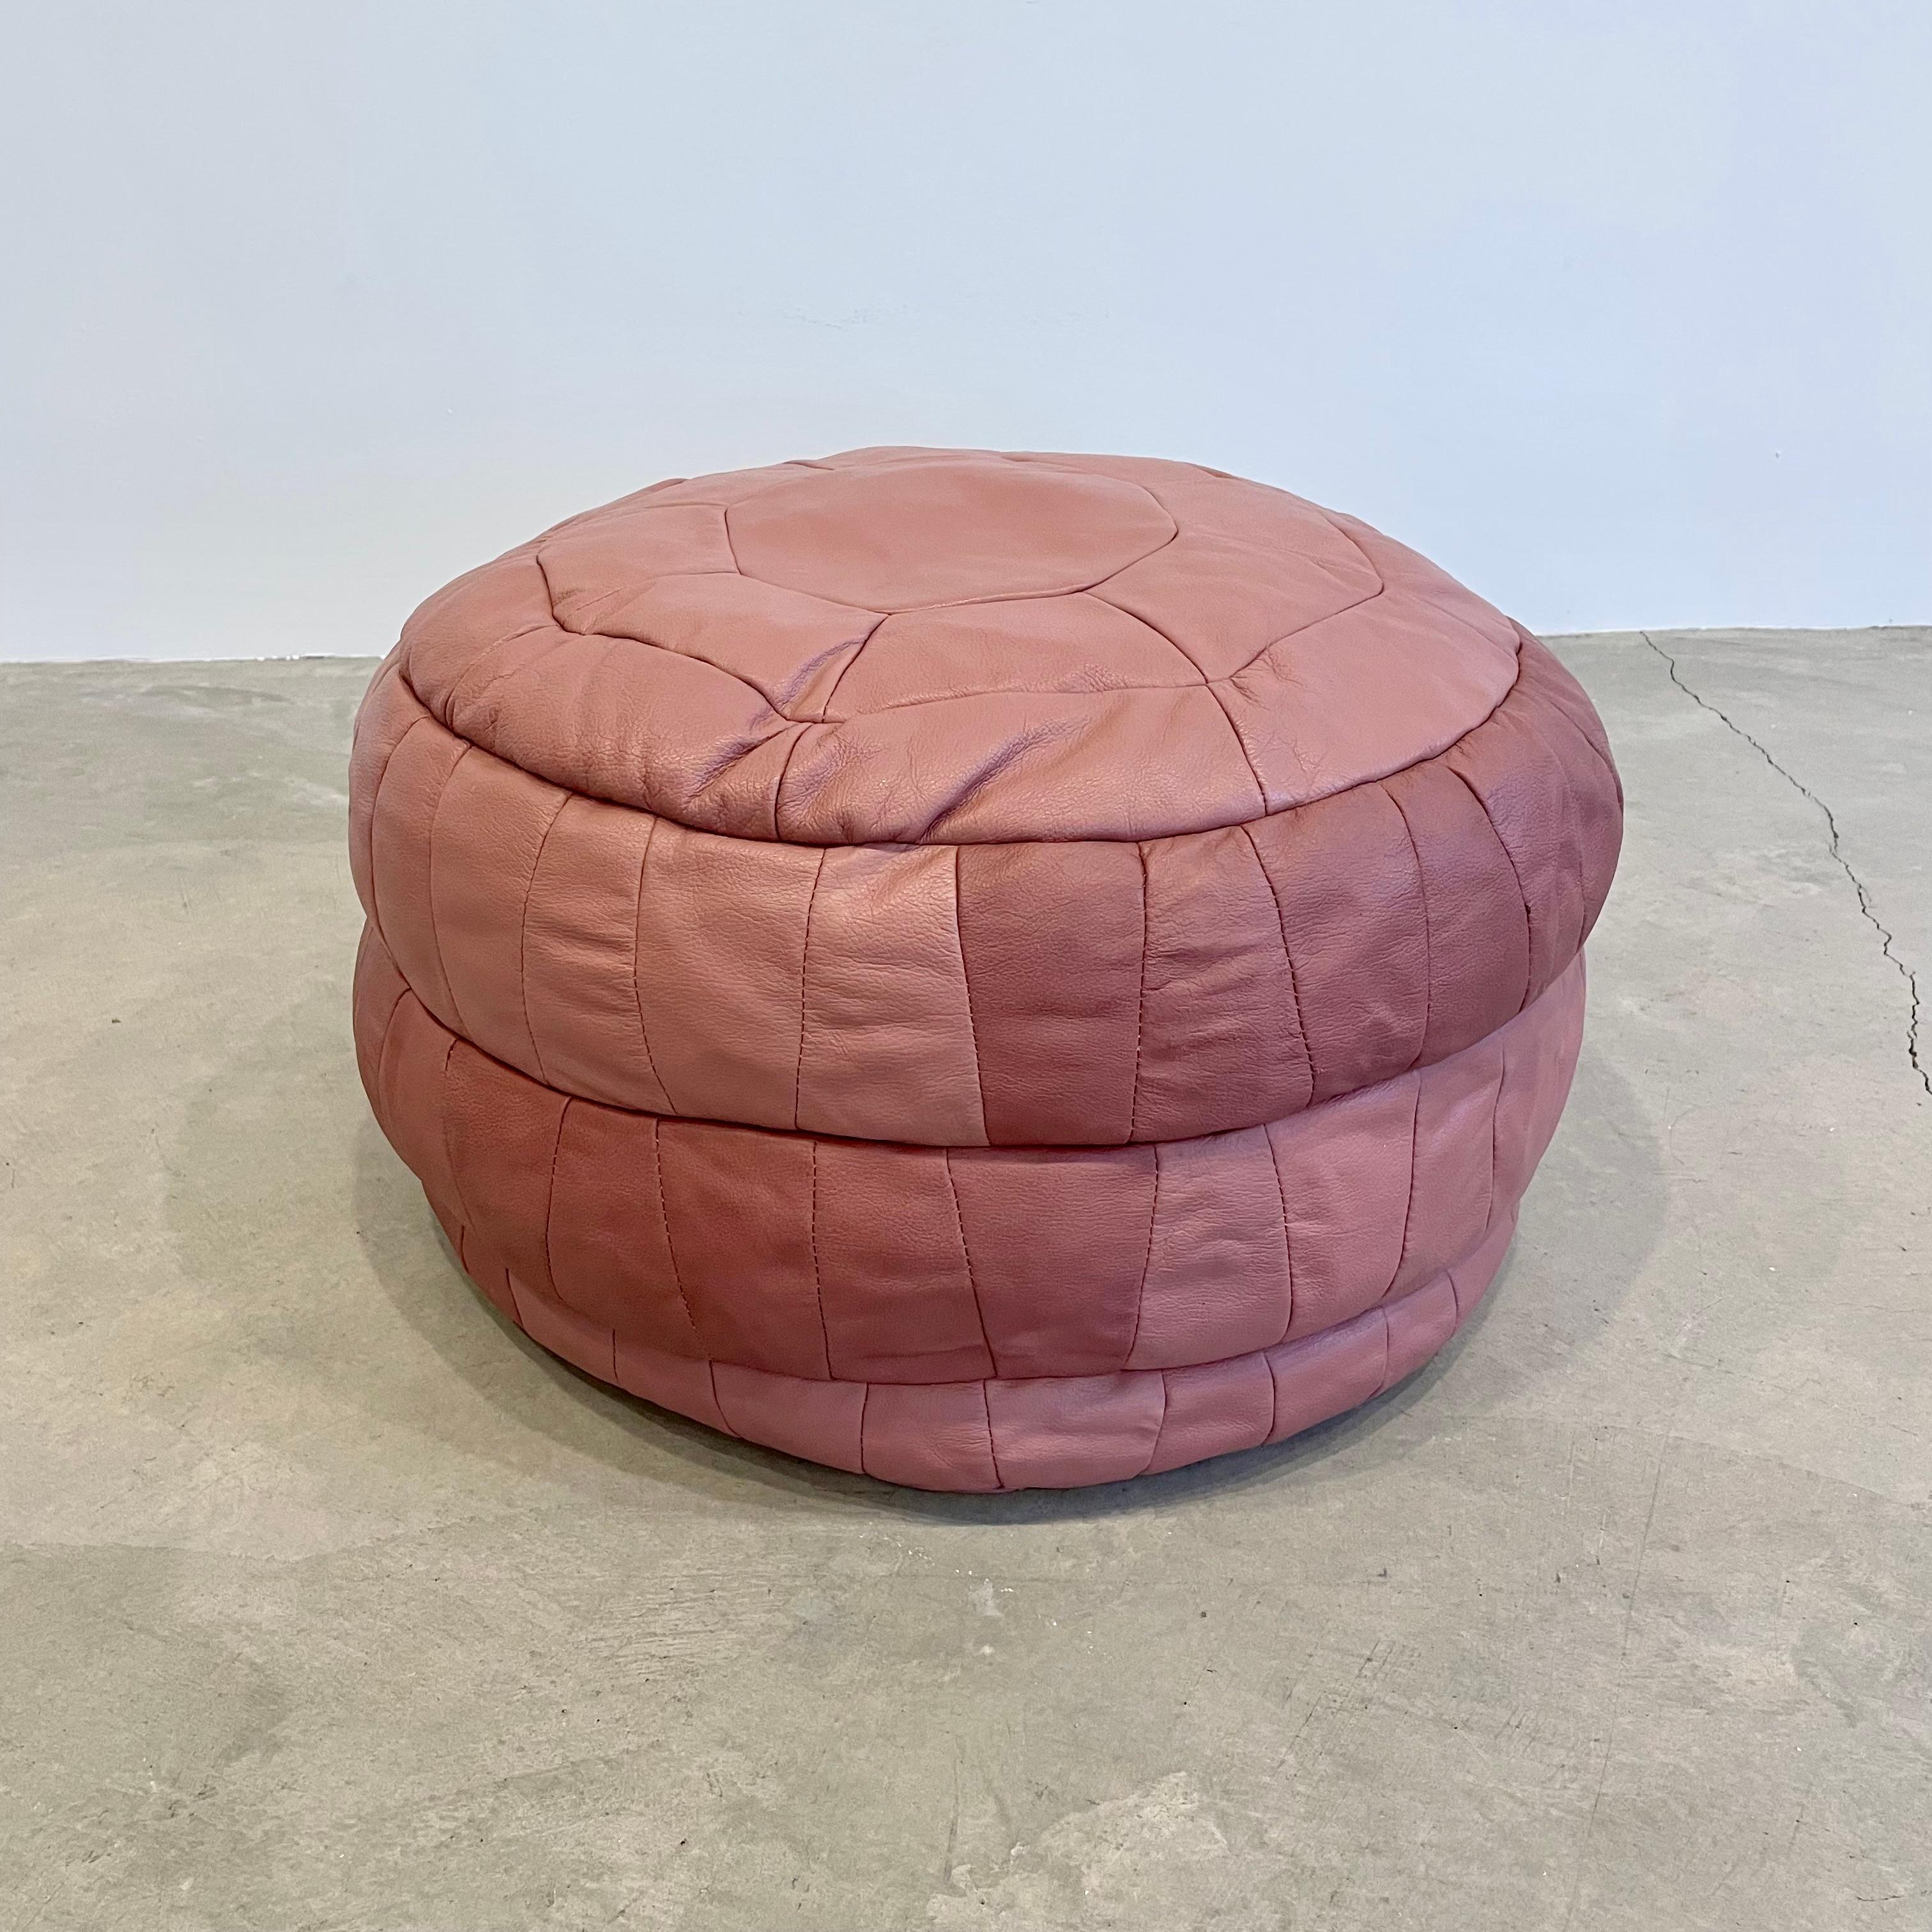 Gorgeous pink rose leather pouf/ottoman by Swiss designer De Sede with square patchwork. Handmade with wonderful faded patina. Gorgeous accent piece. Good vintage condition. Wear appropriate with age. Brand new filler. Perfect living room decor,